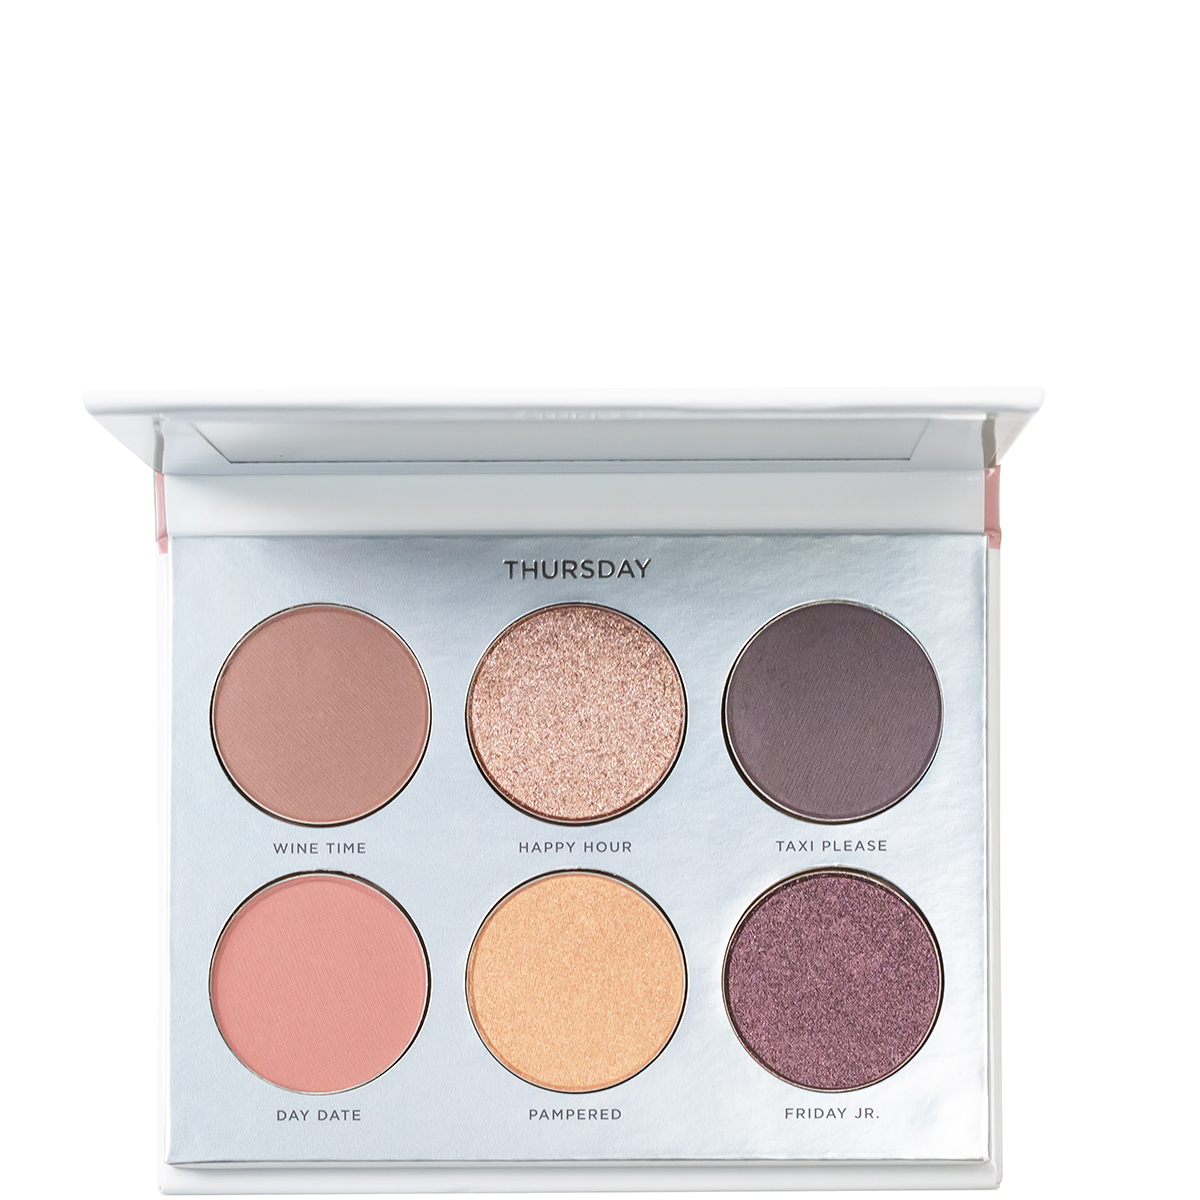 Pur On Point Eyeshadow Palette